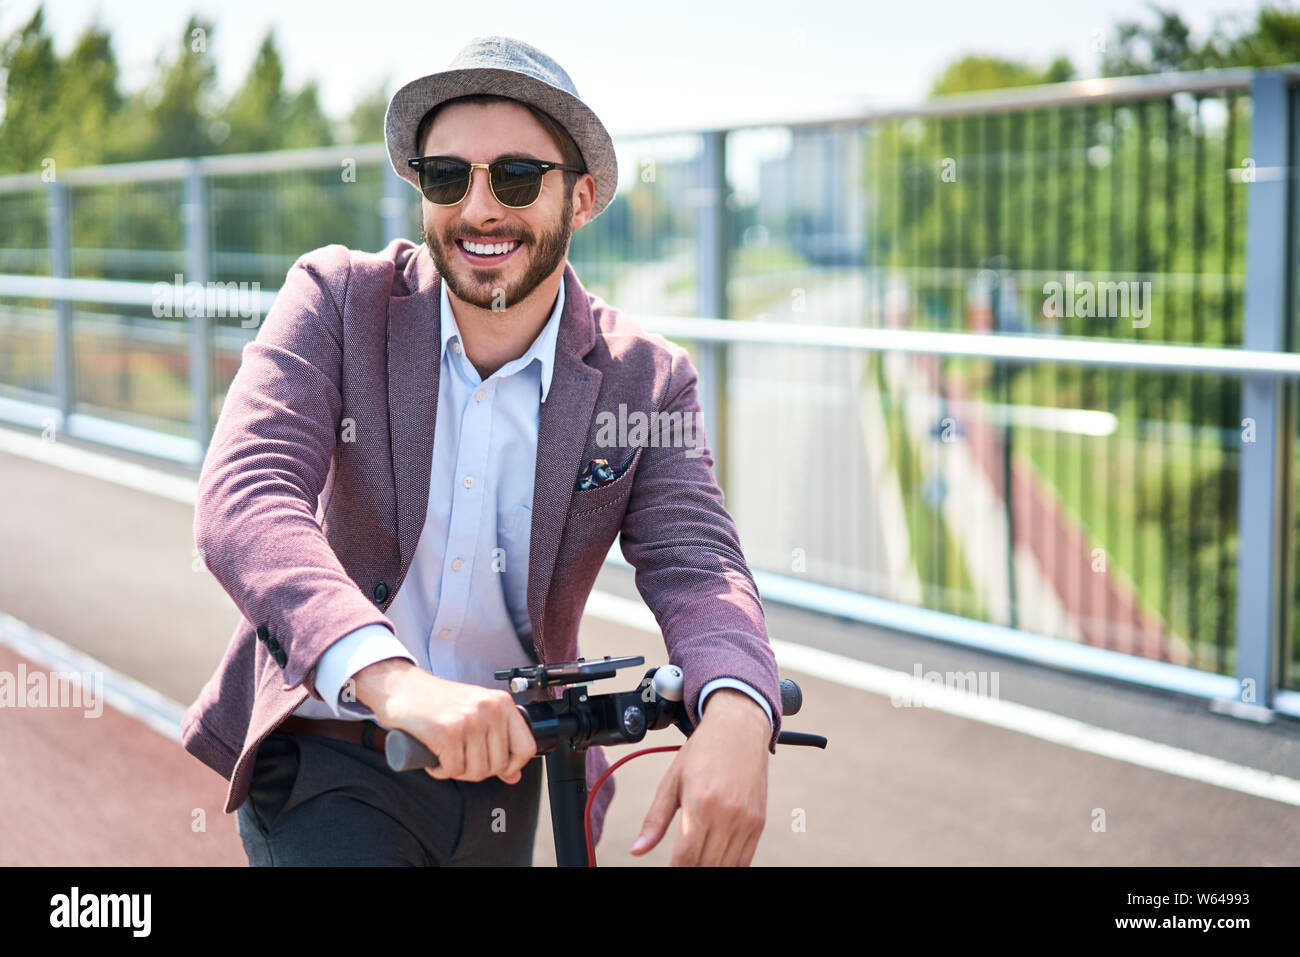 Portrait of stylish man on electric scooter during sunny day Stock Photo